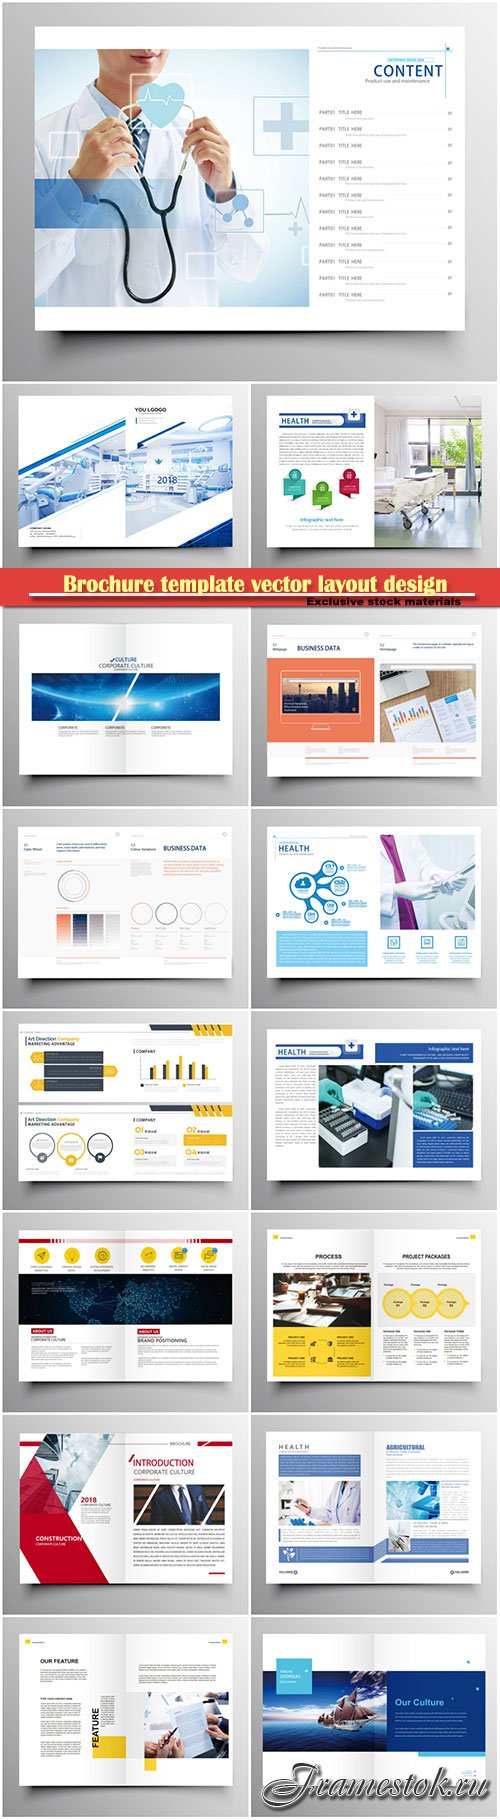 Brochure template vector layout design, corporate business annual report, magazine, flyer mockup # 126